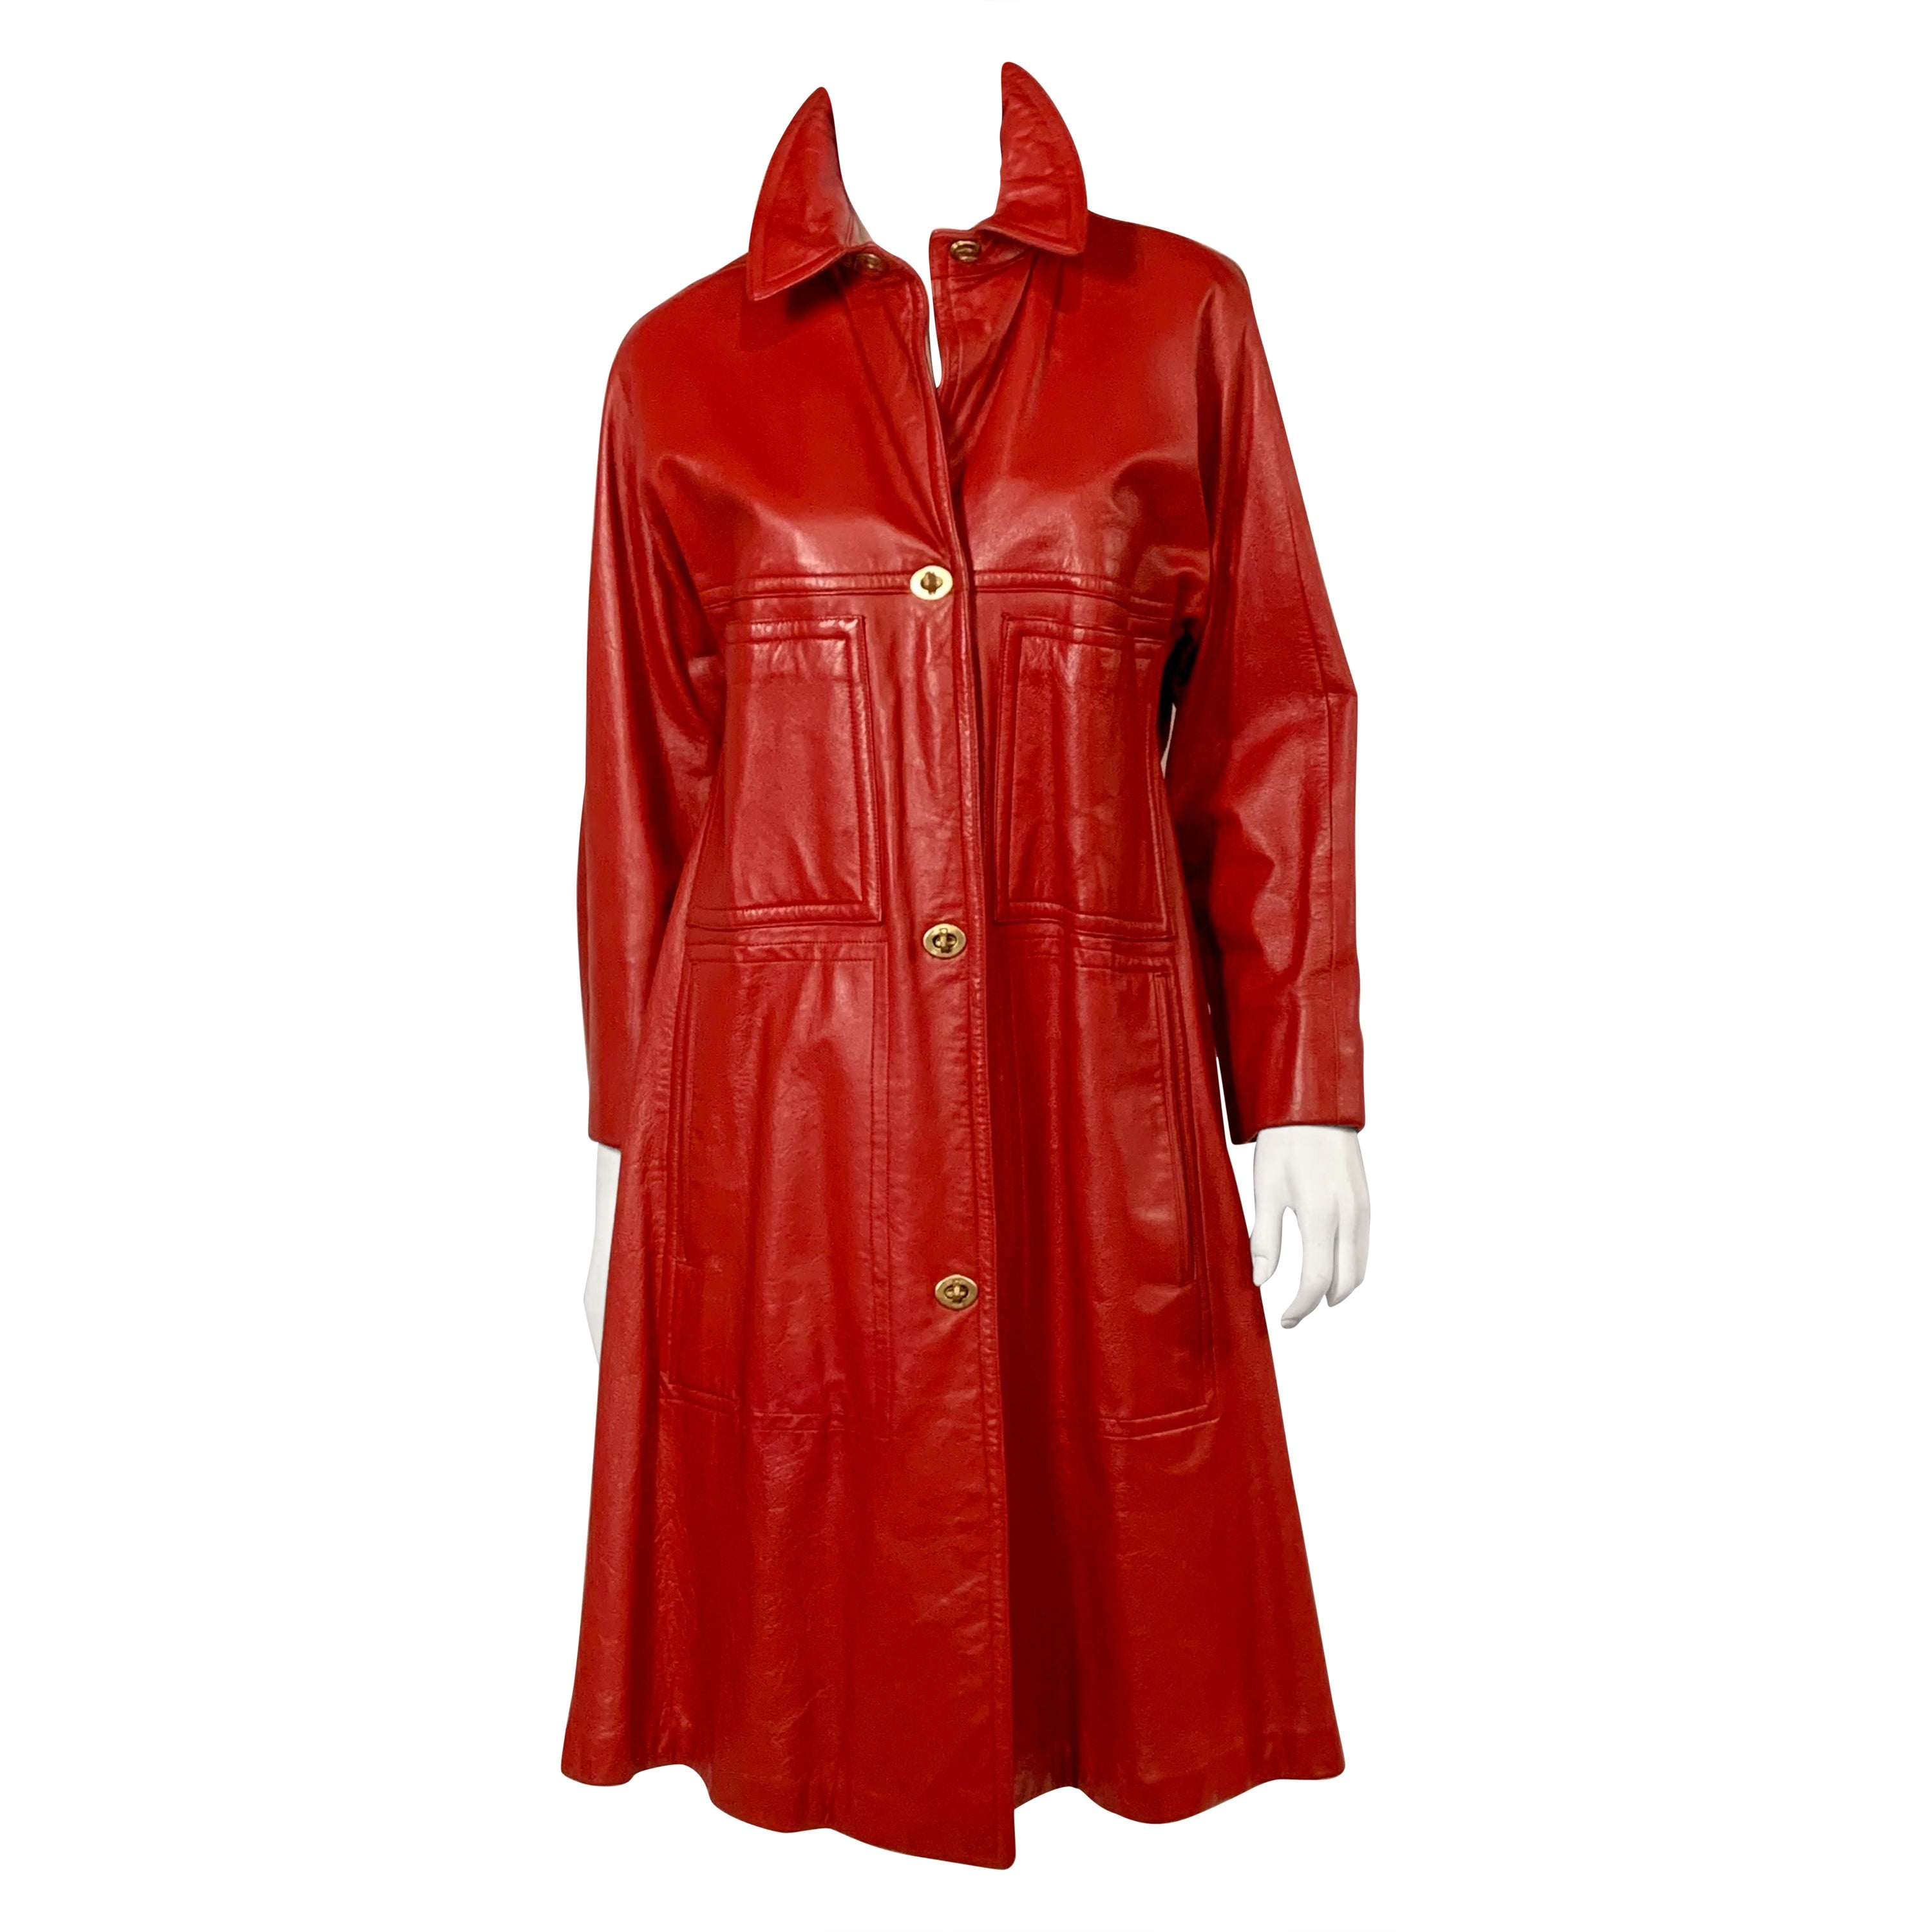 Bonnie Cashin for Sills Red Leather Coat with Brass Toggle Closures For Sale